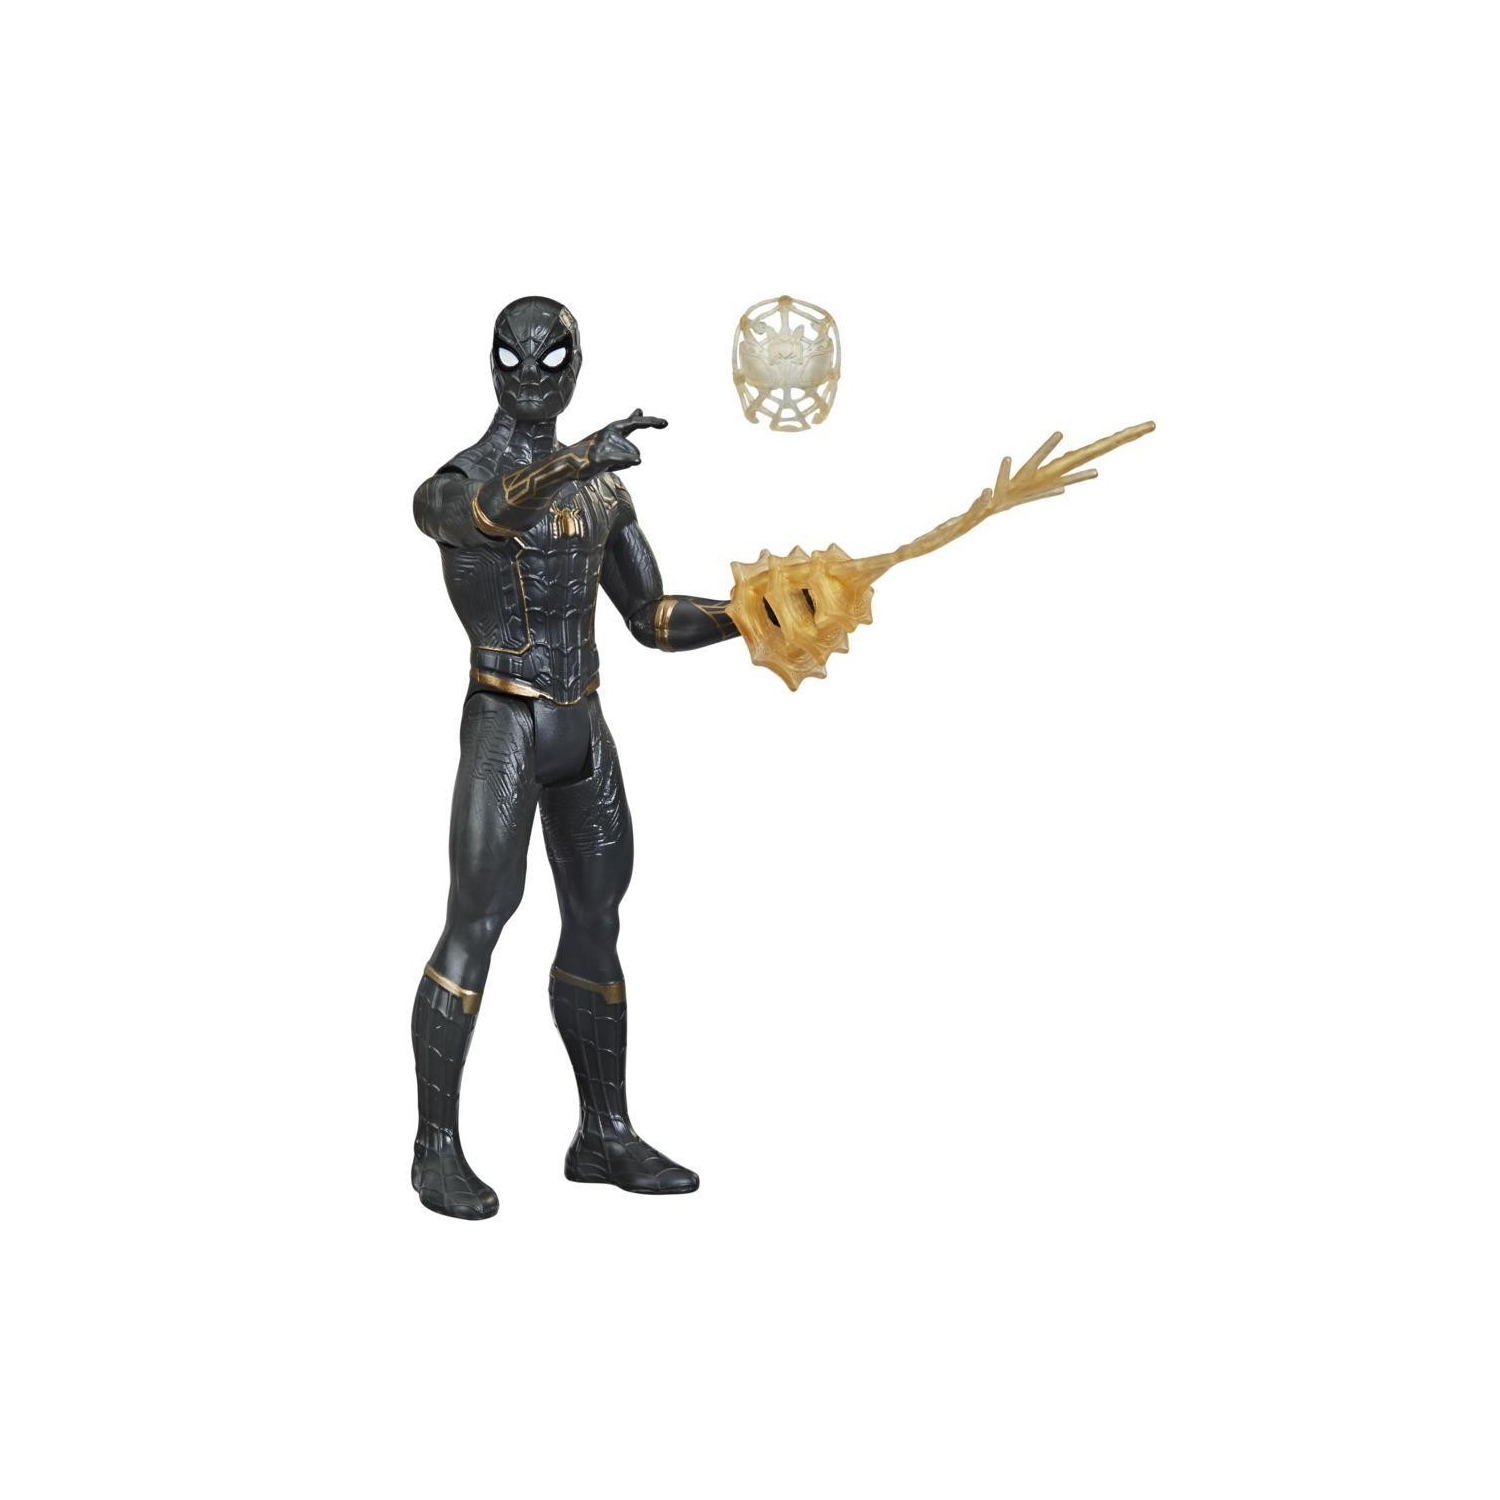 Mystery Web Gear: Black and Gold Suit Spider-Man Marvel Spider-Man: No Way Home 6" Action Figure